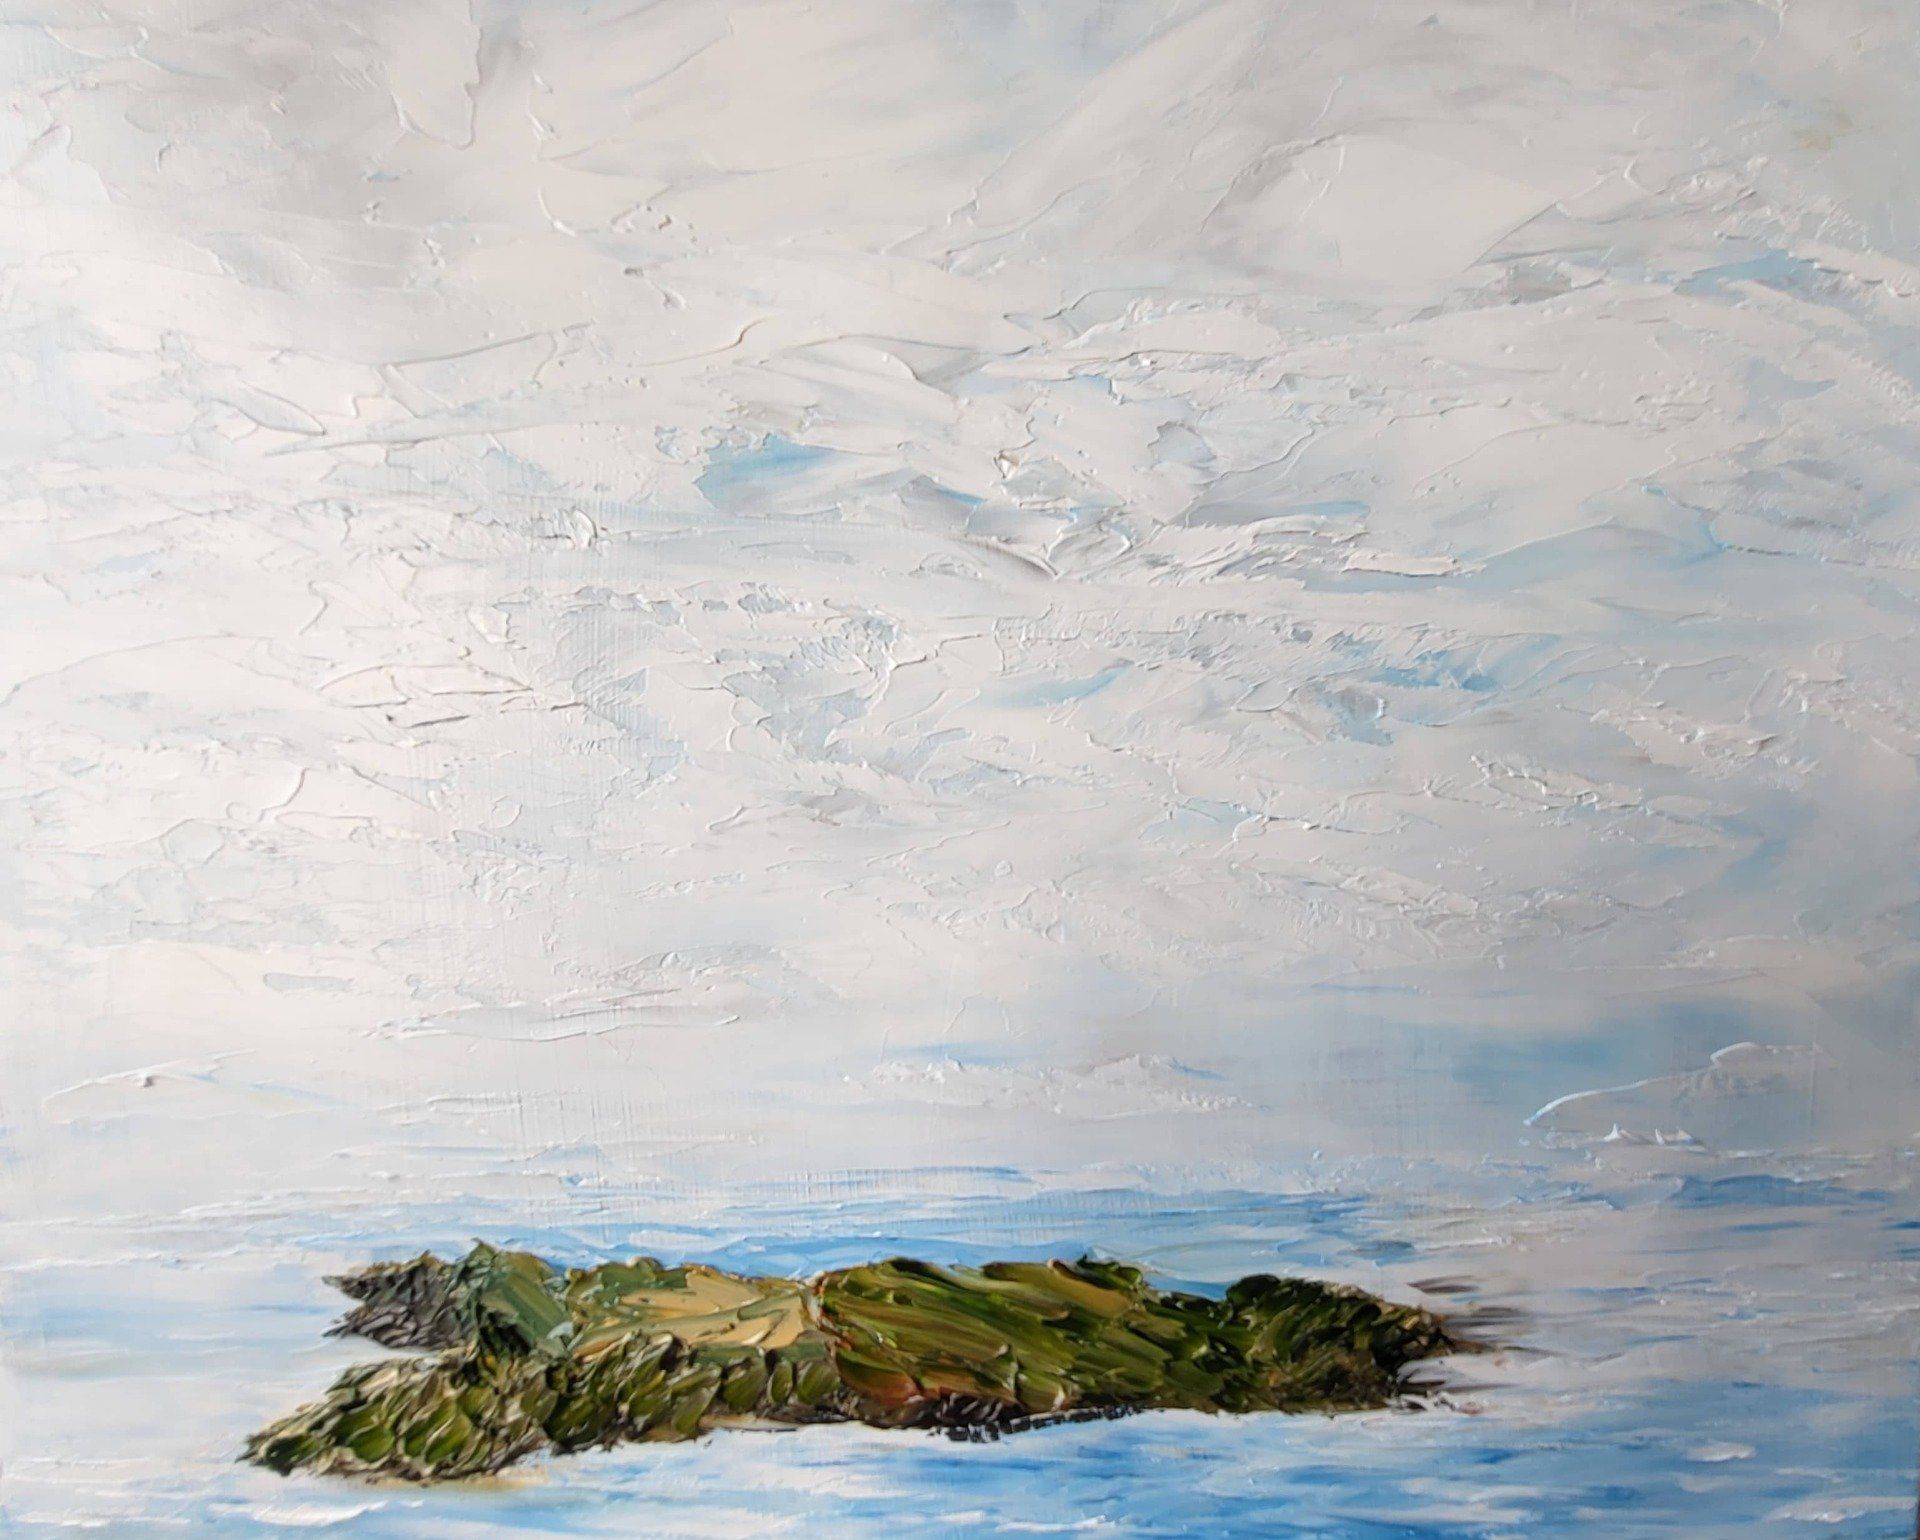 This is an oil on Masonite 10 in. x 8 in. When you arrive you notice the vegetation and the earth tone rocky shoreline with sloping vegetative mountains that look out to the horizon. In the centre of the Island there is a valley. The sky is a subtle blend of blue and white.